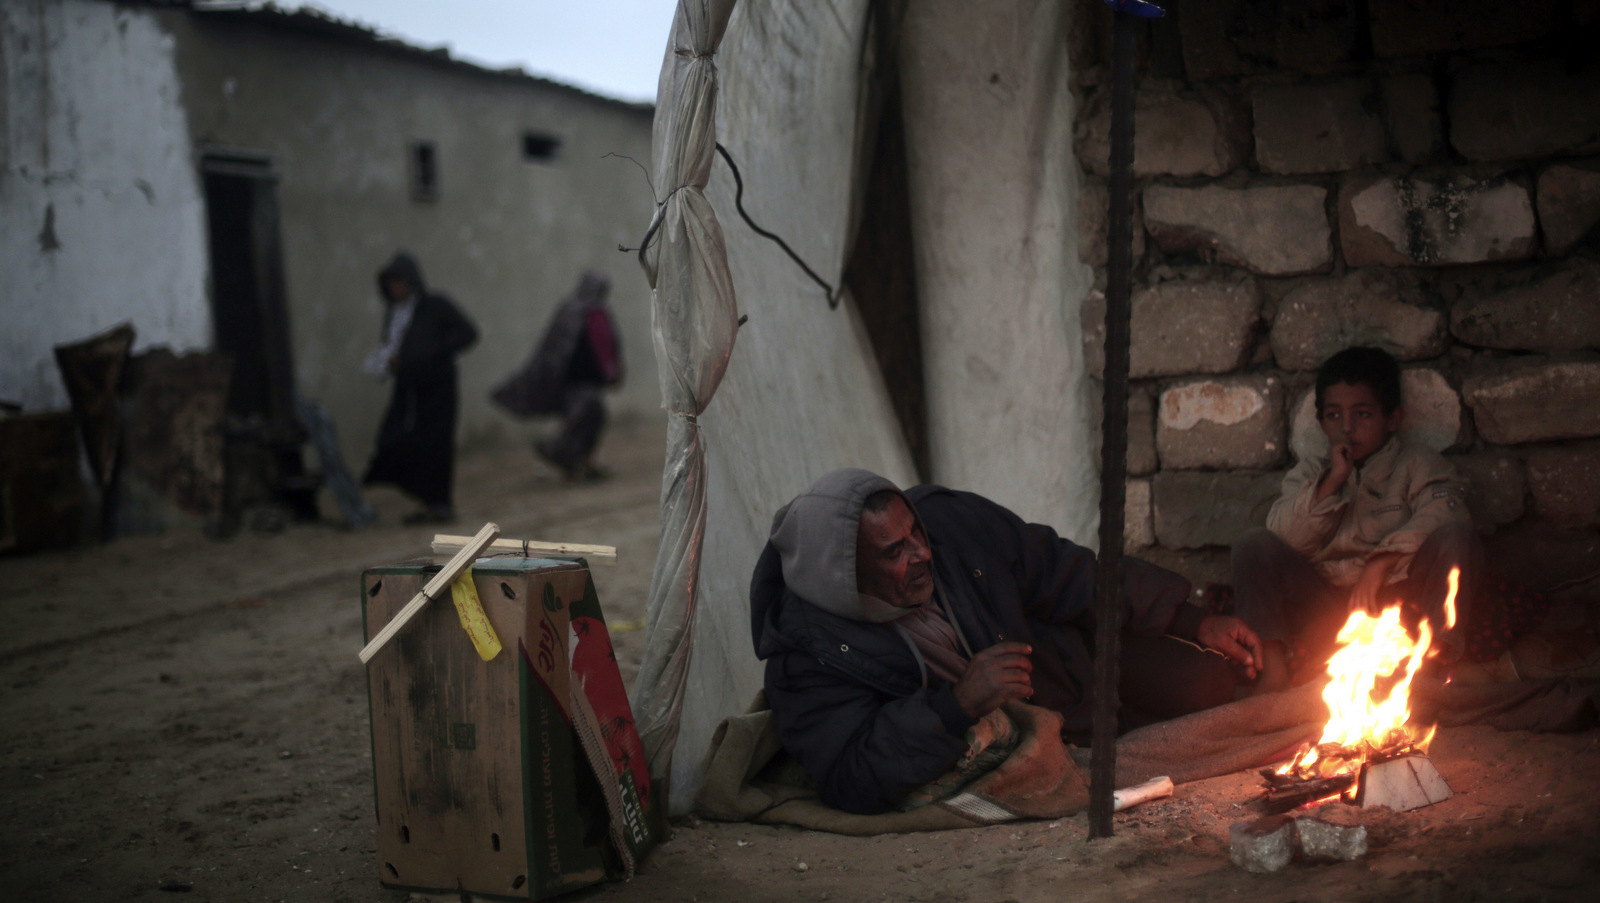 A Palestinian man and his son warm themselves by a fire during cold, rainy weather on the outskirts of the Khan Younis refugee camp in the southern Gaza Strip, Jan. 5, 2018. (AP/ Khalil Hamra)